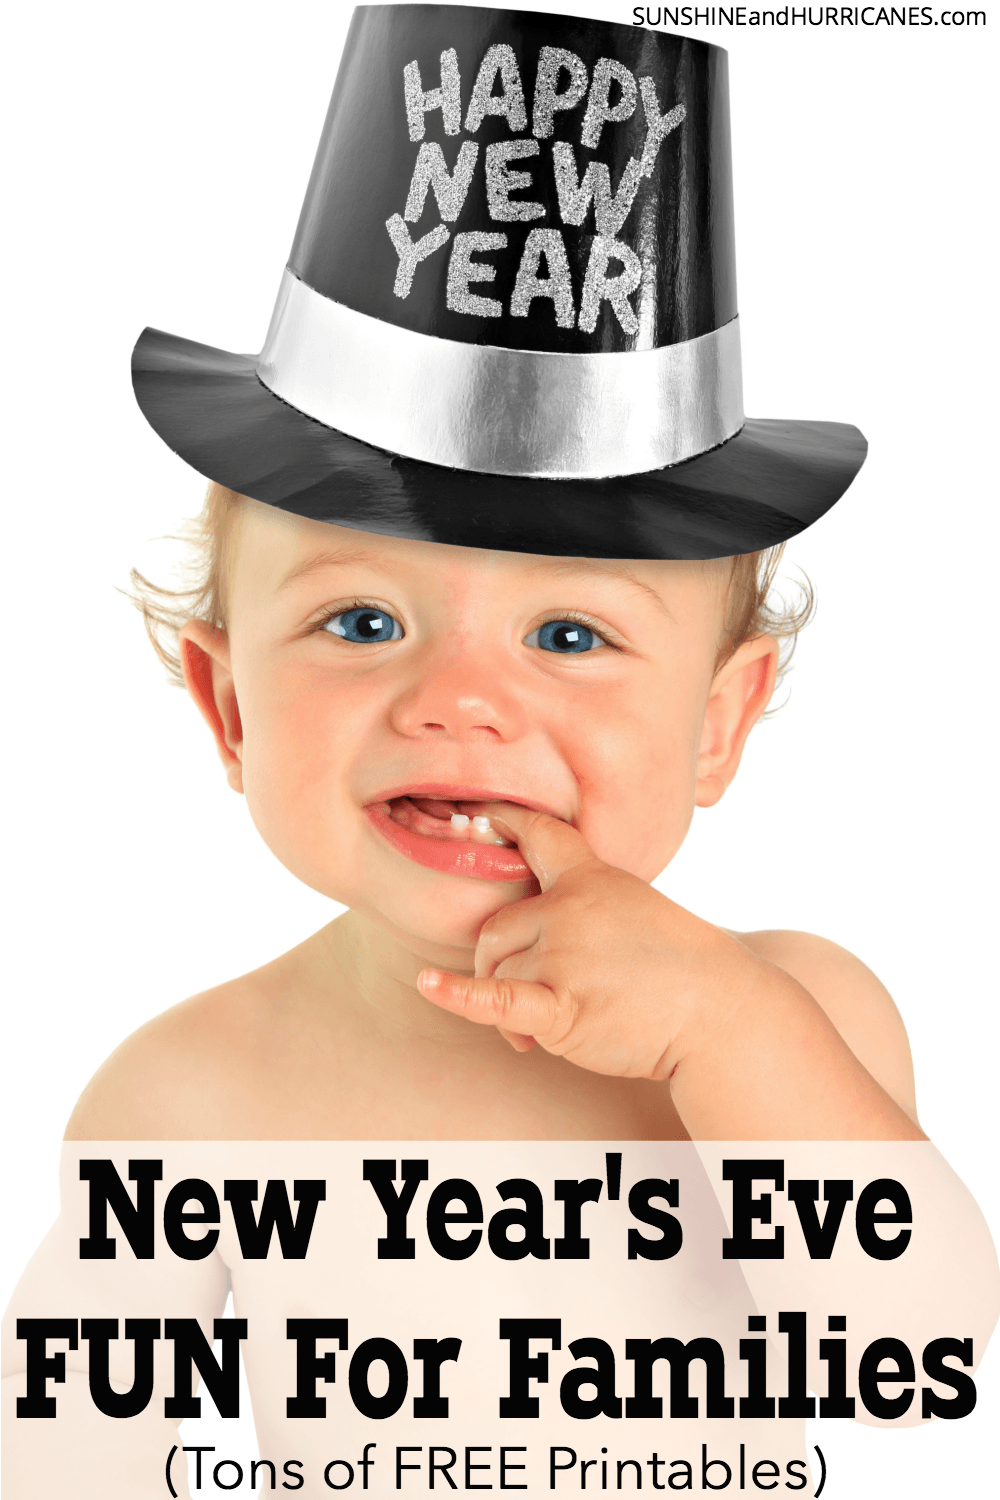 Looking for some family fun for New Year's? Make a party at home with all these free New Year's Printables. Games, party favors, goal planning, photo booth props and more to make ringing in the New Year a true celebration. New Year's Eve Printables from SunshineandHurricanes.com 